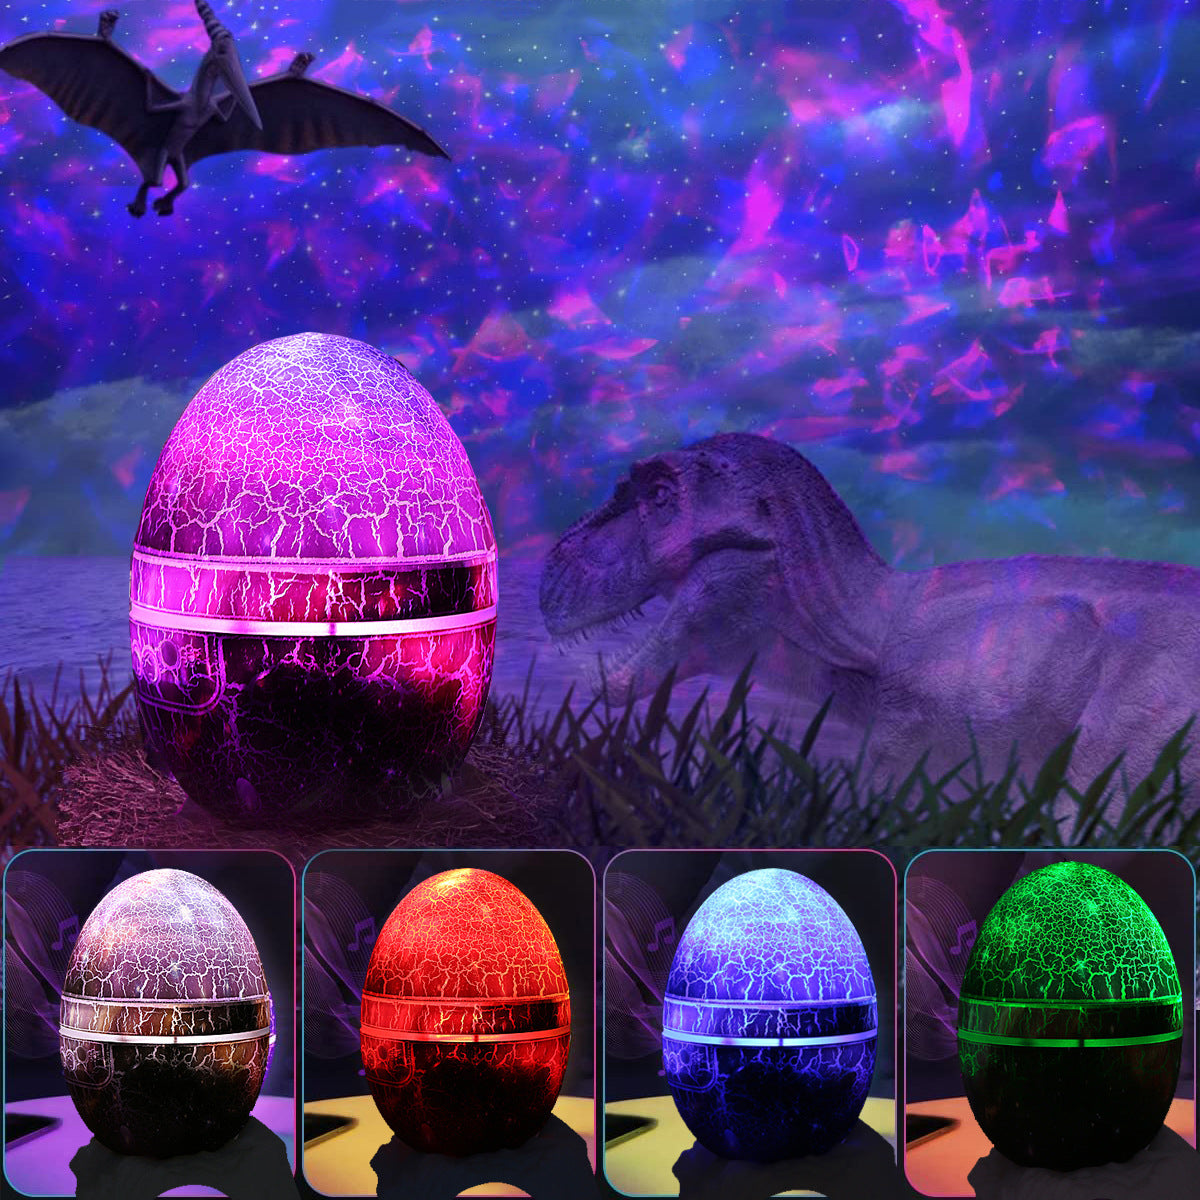 Cracked dinosaur eggs, starry sky projection lights, bedroom atmosphere lights, remote control, starry projectors